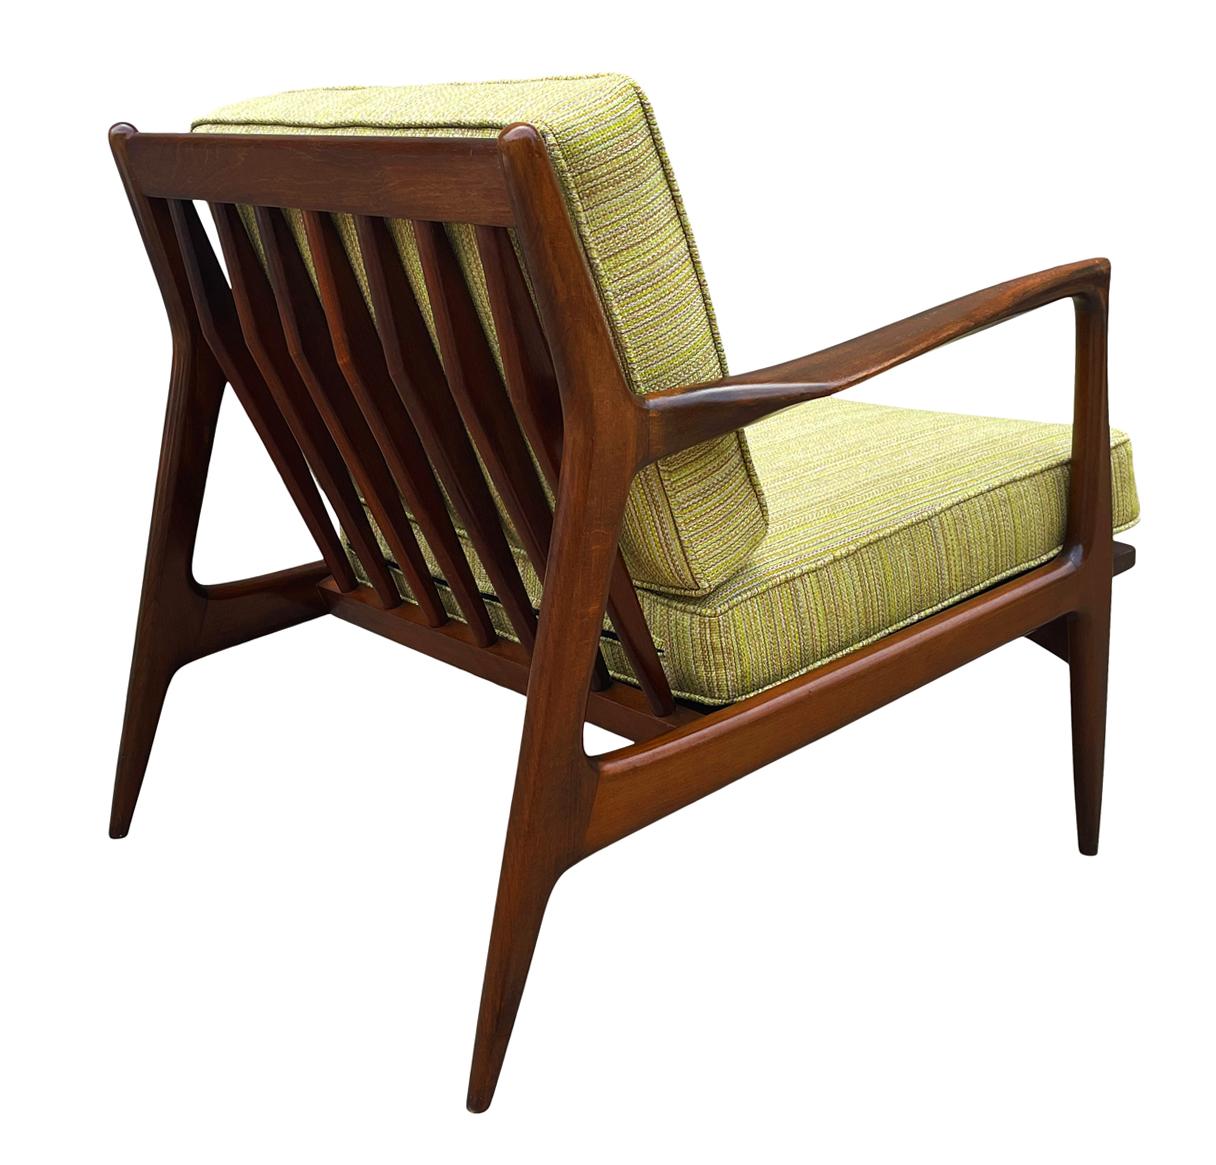 A stunning pair of vintage IB Kofod-Larsen lounge chairs produced by Selig in Denmark ca. 1950's. They feature solid walnut frames with restored upholstery and seat webbing. Price includes the pair.